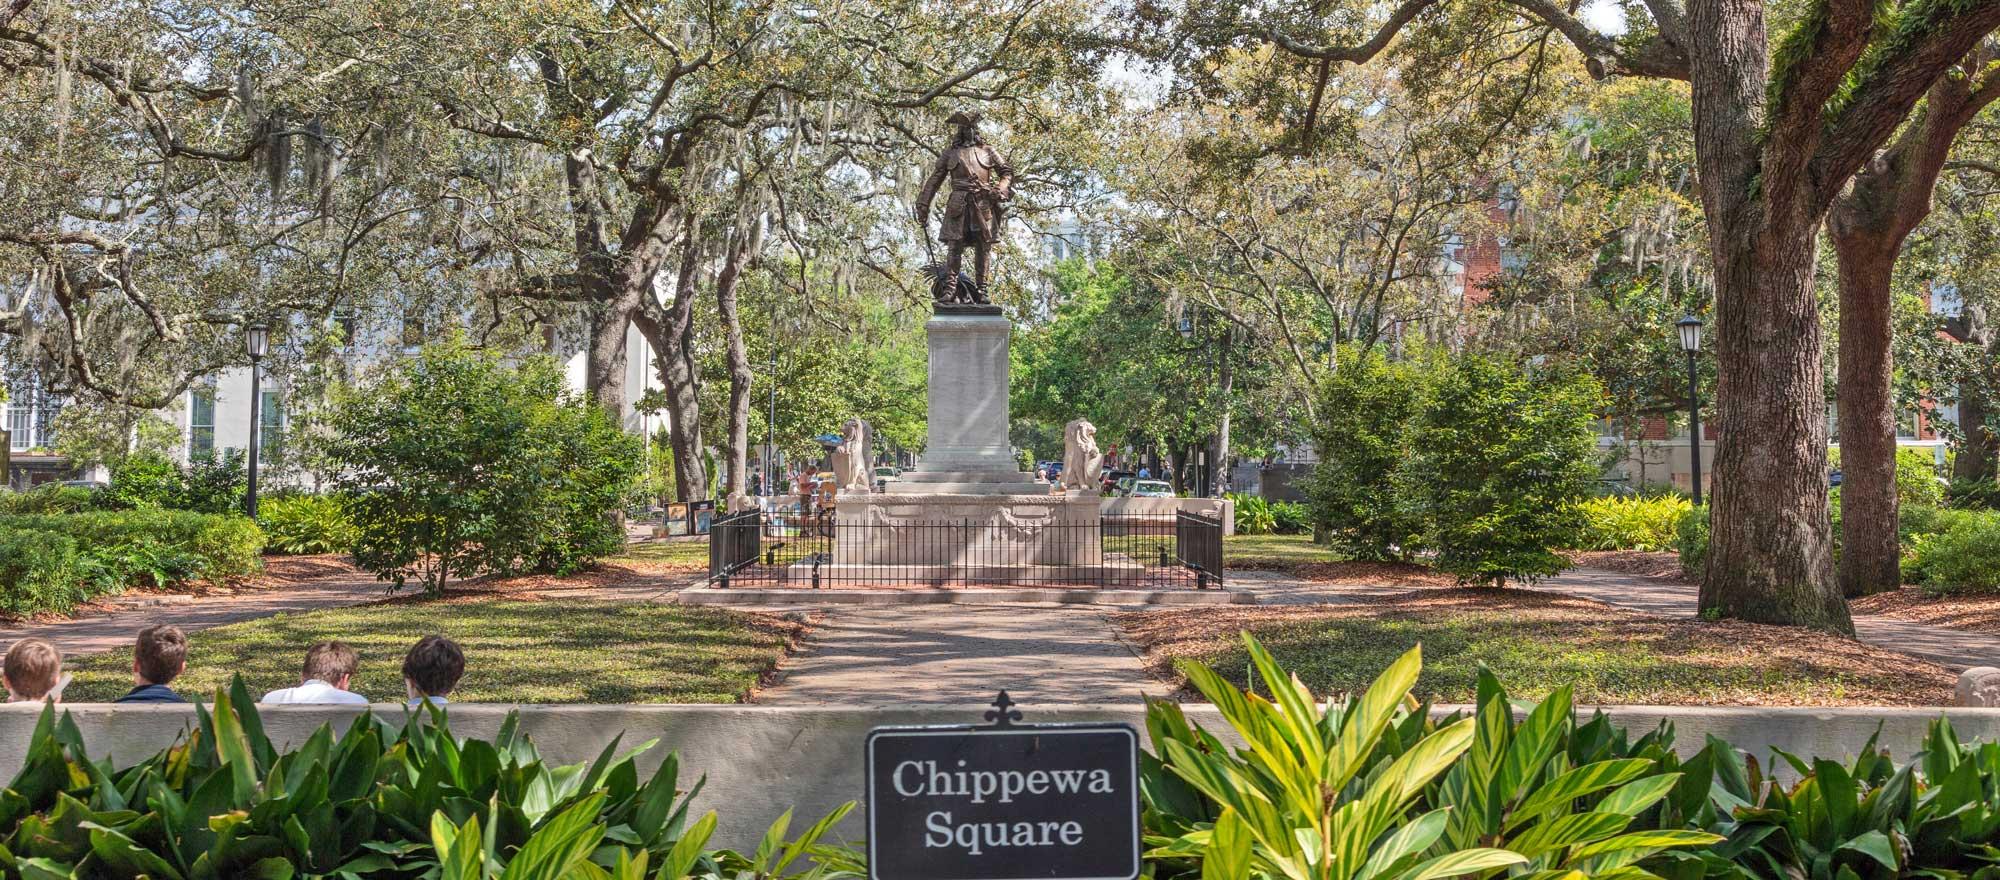 Chippewa Square, which includes a statue of Oglethorpe. Adobe Stock